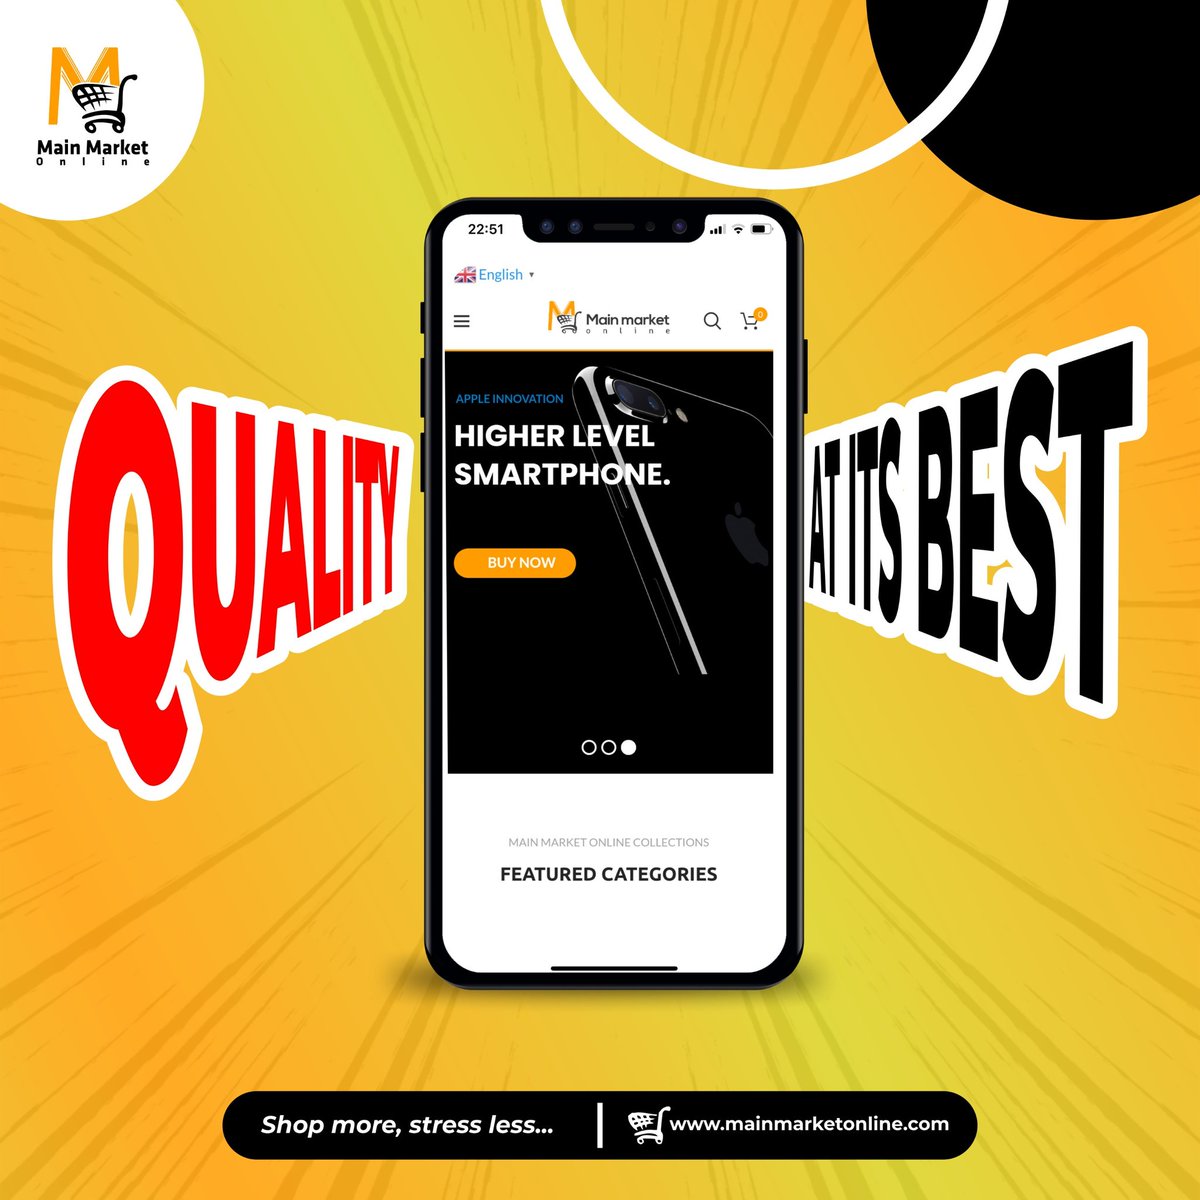 Searching for quality products?
Look no further cause MainMarketOnline is here! From beauty to home essentials, we've got you covered. Visit our website @ mainmarketonline.com today and Start shopping!
#qualityproducts #MMO #MainMarketOnline #shoplocal #onlinestore